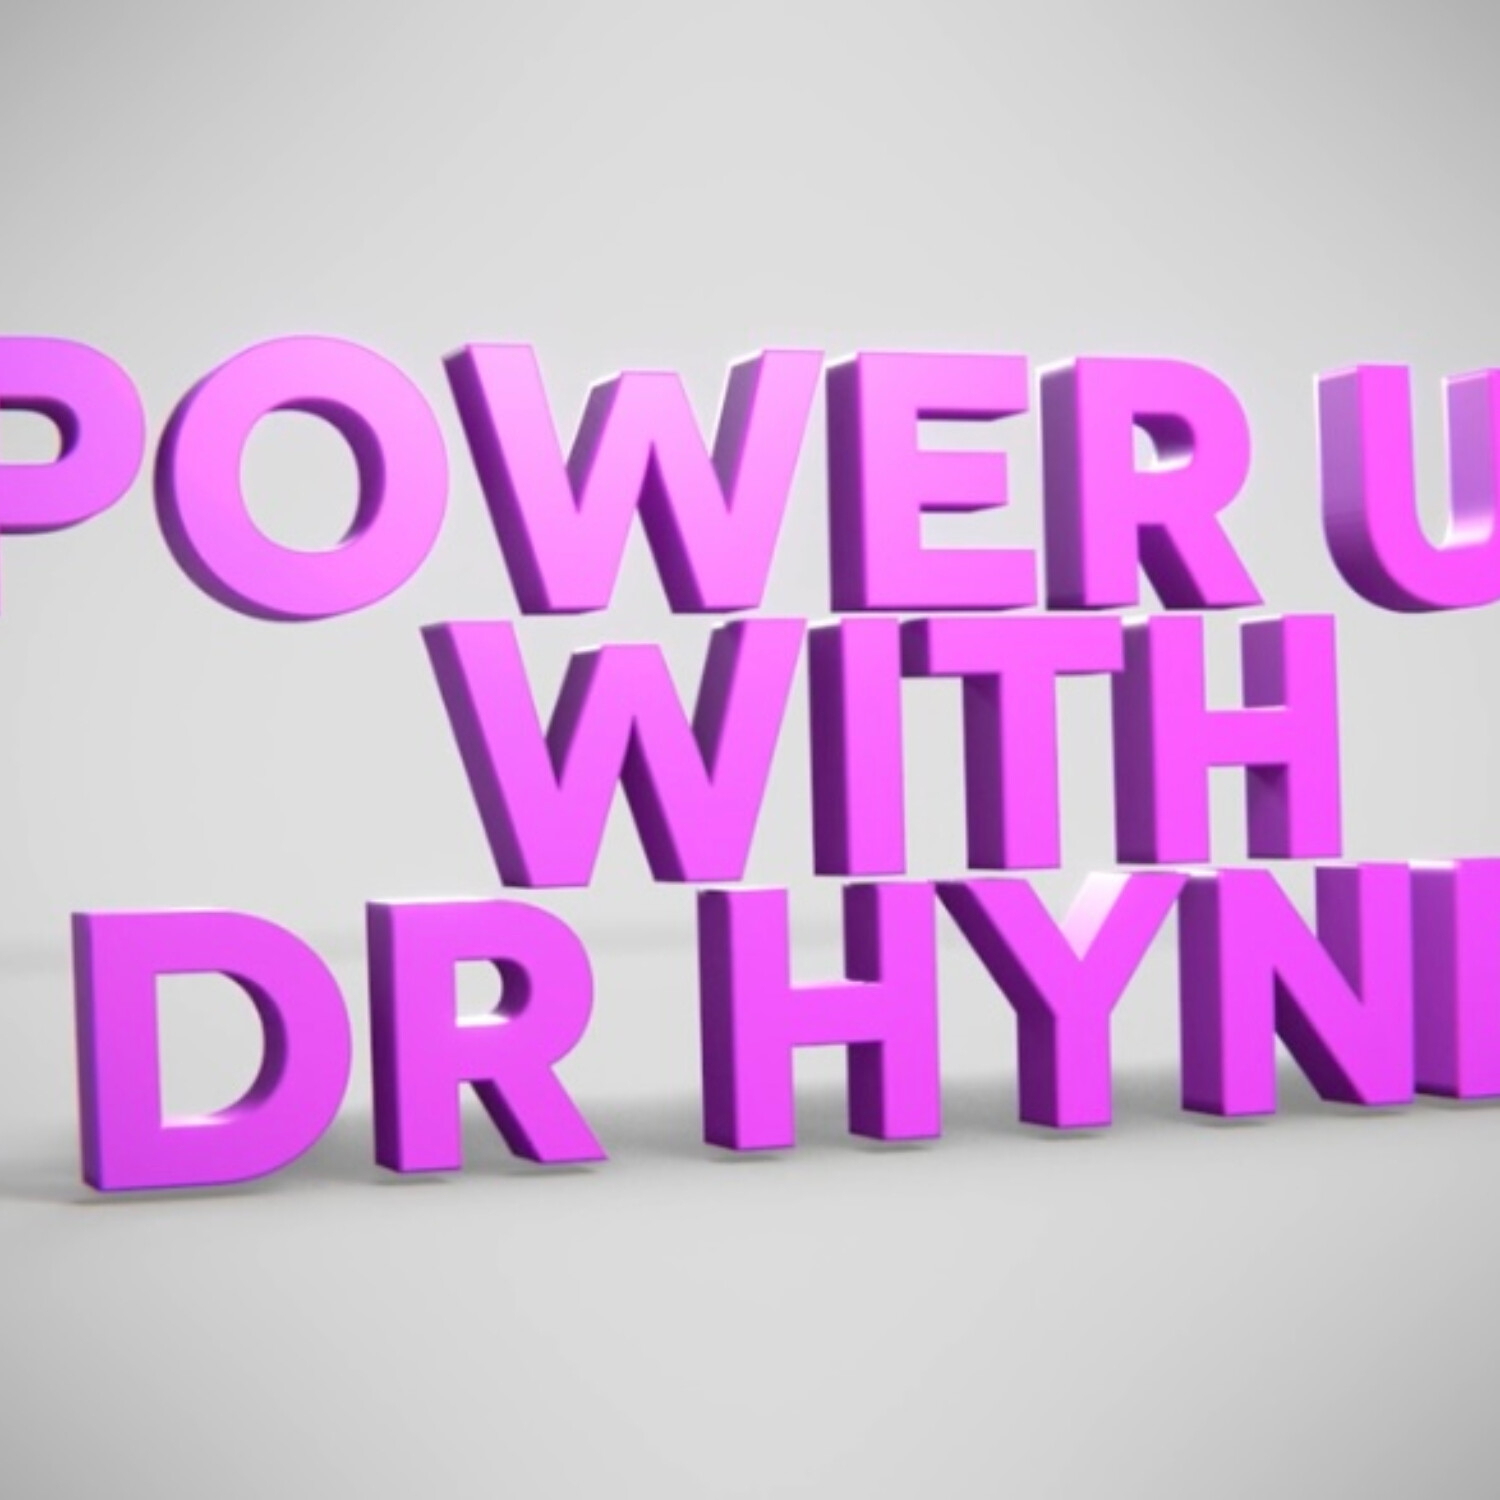 Women's Empowerment Series with Dr. Hynd and Dr. Patricia from Arizona